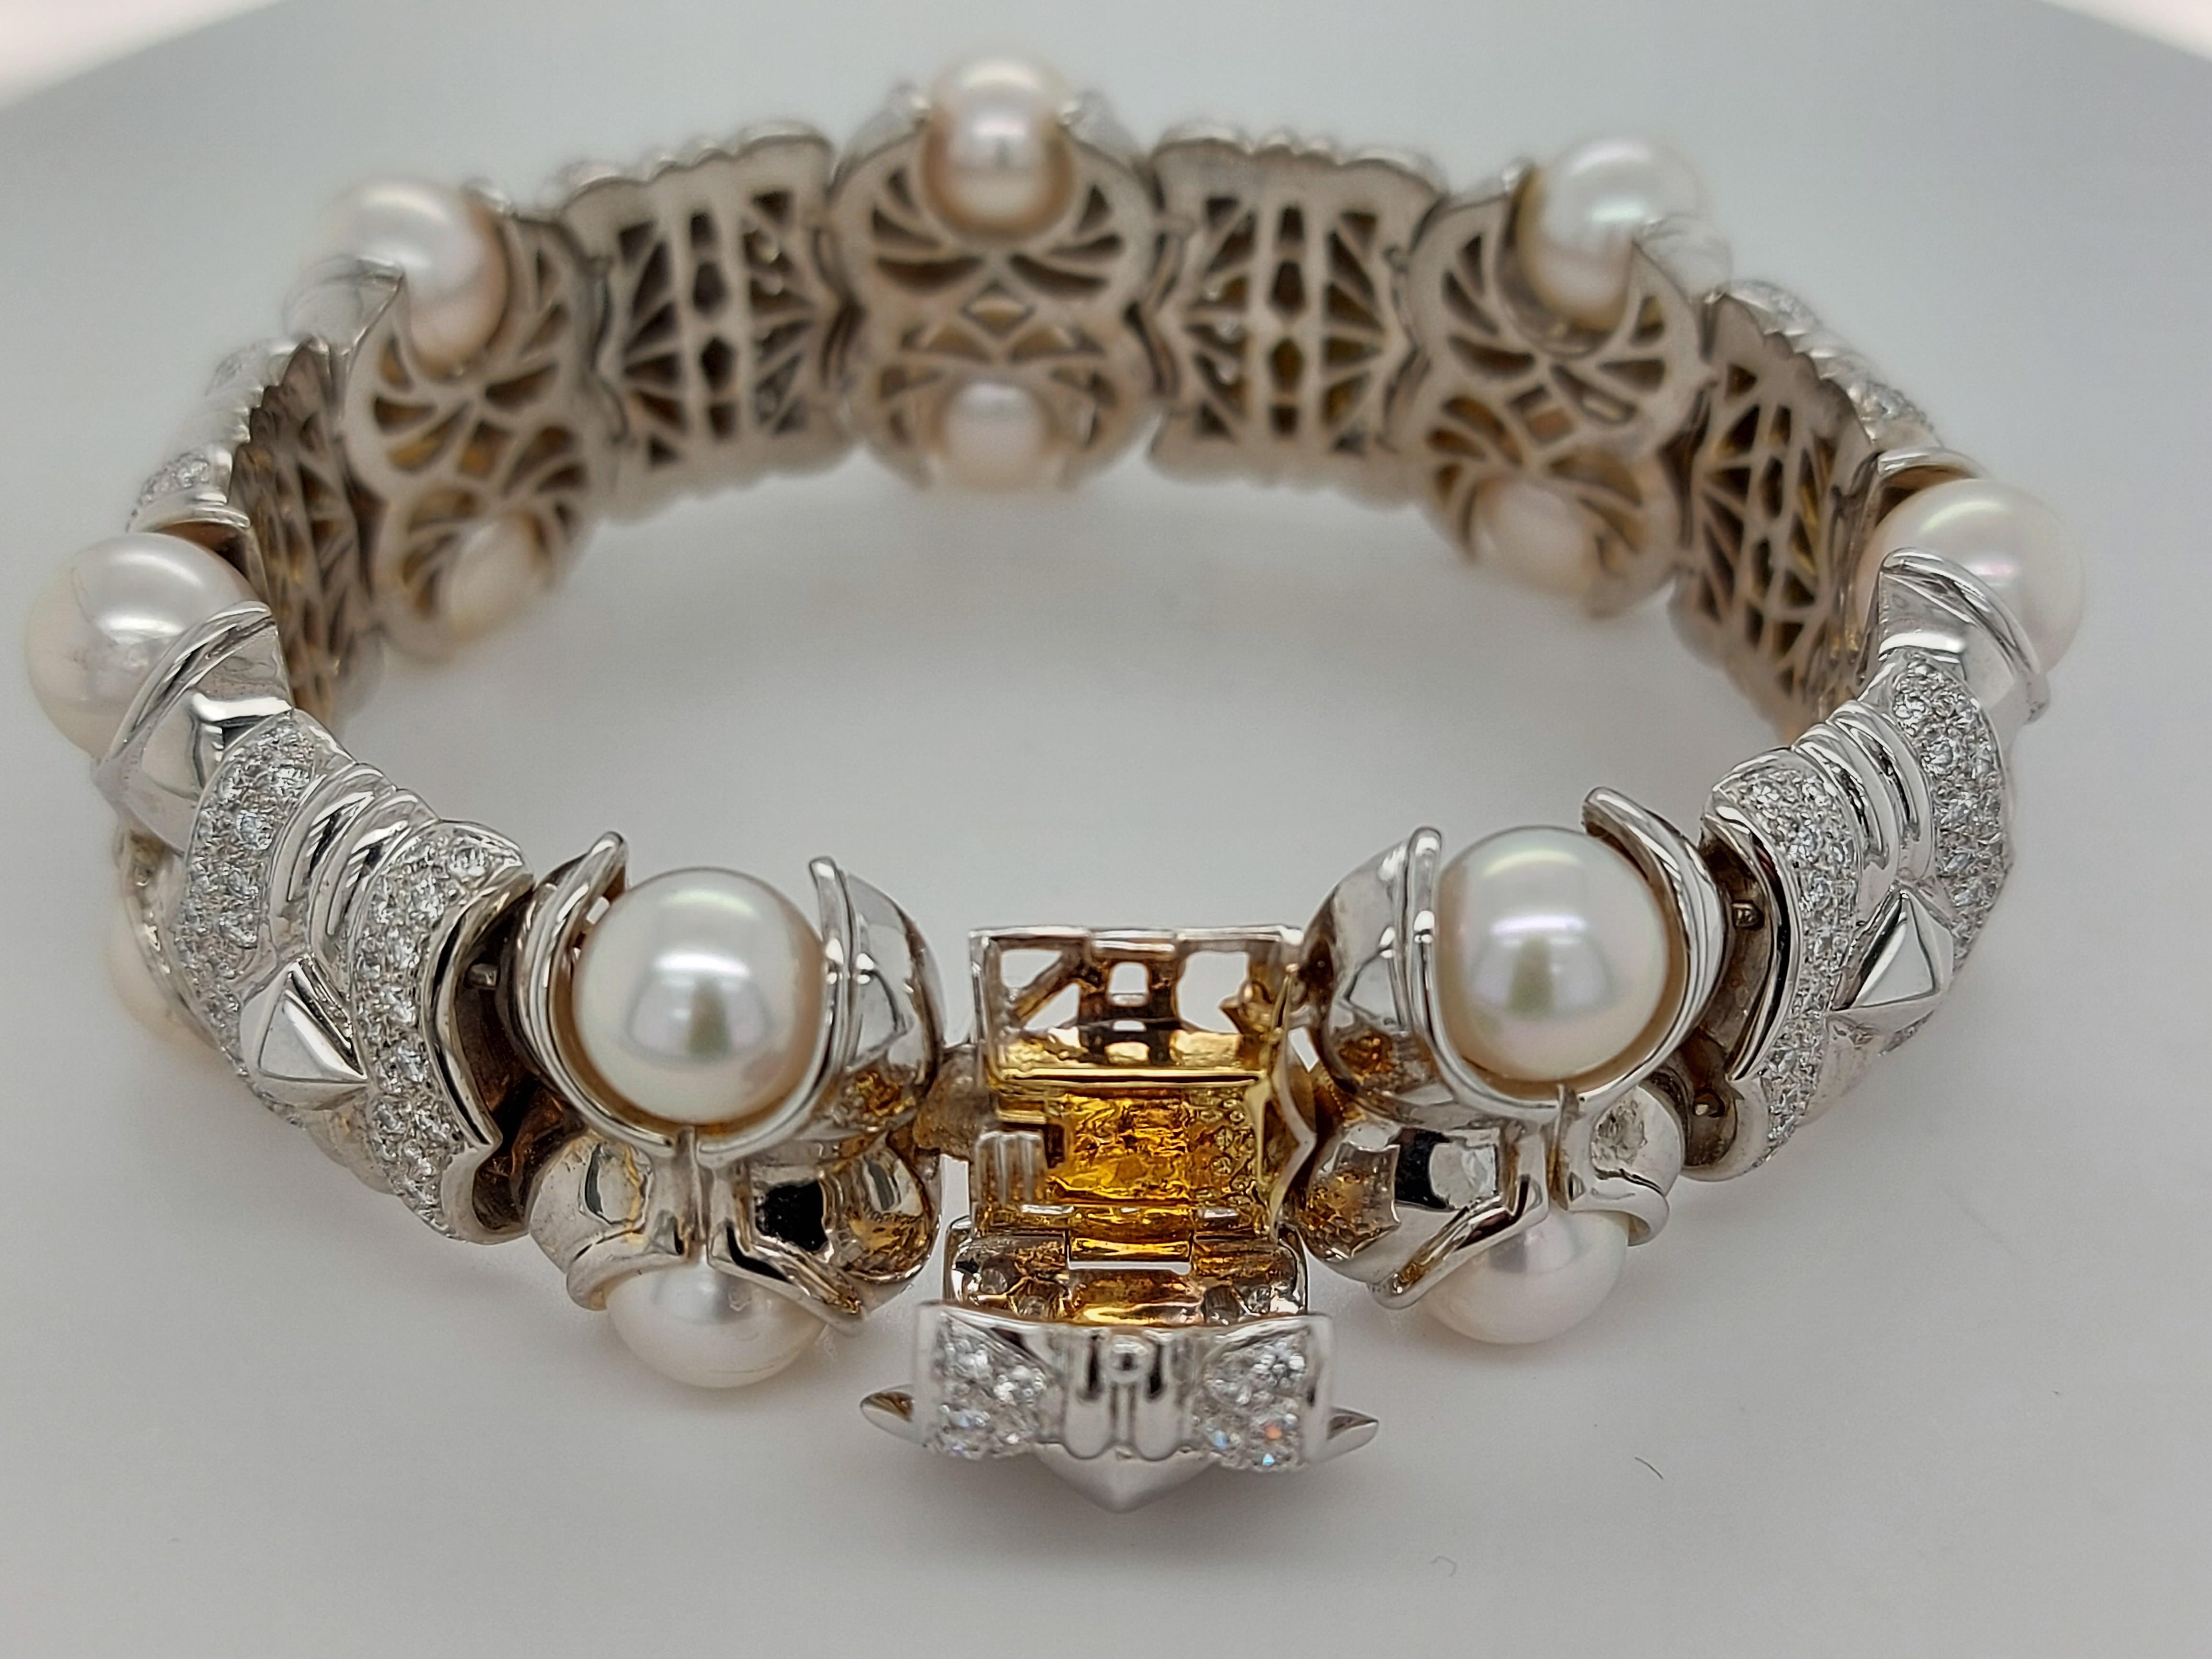 18 Karat White Gold Bracelet with Brilliant Cut Diamonds and Pearls For Sale 6